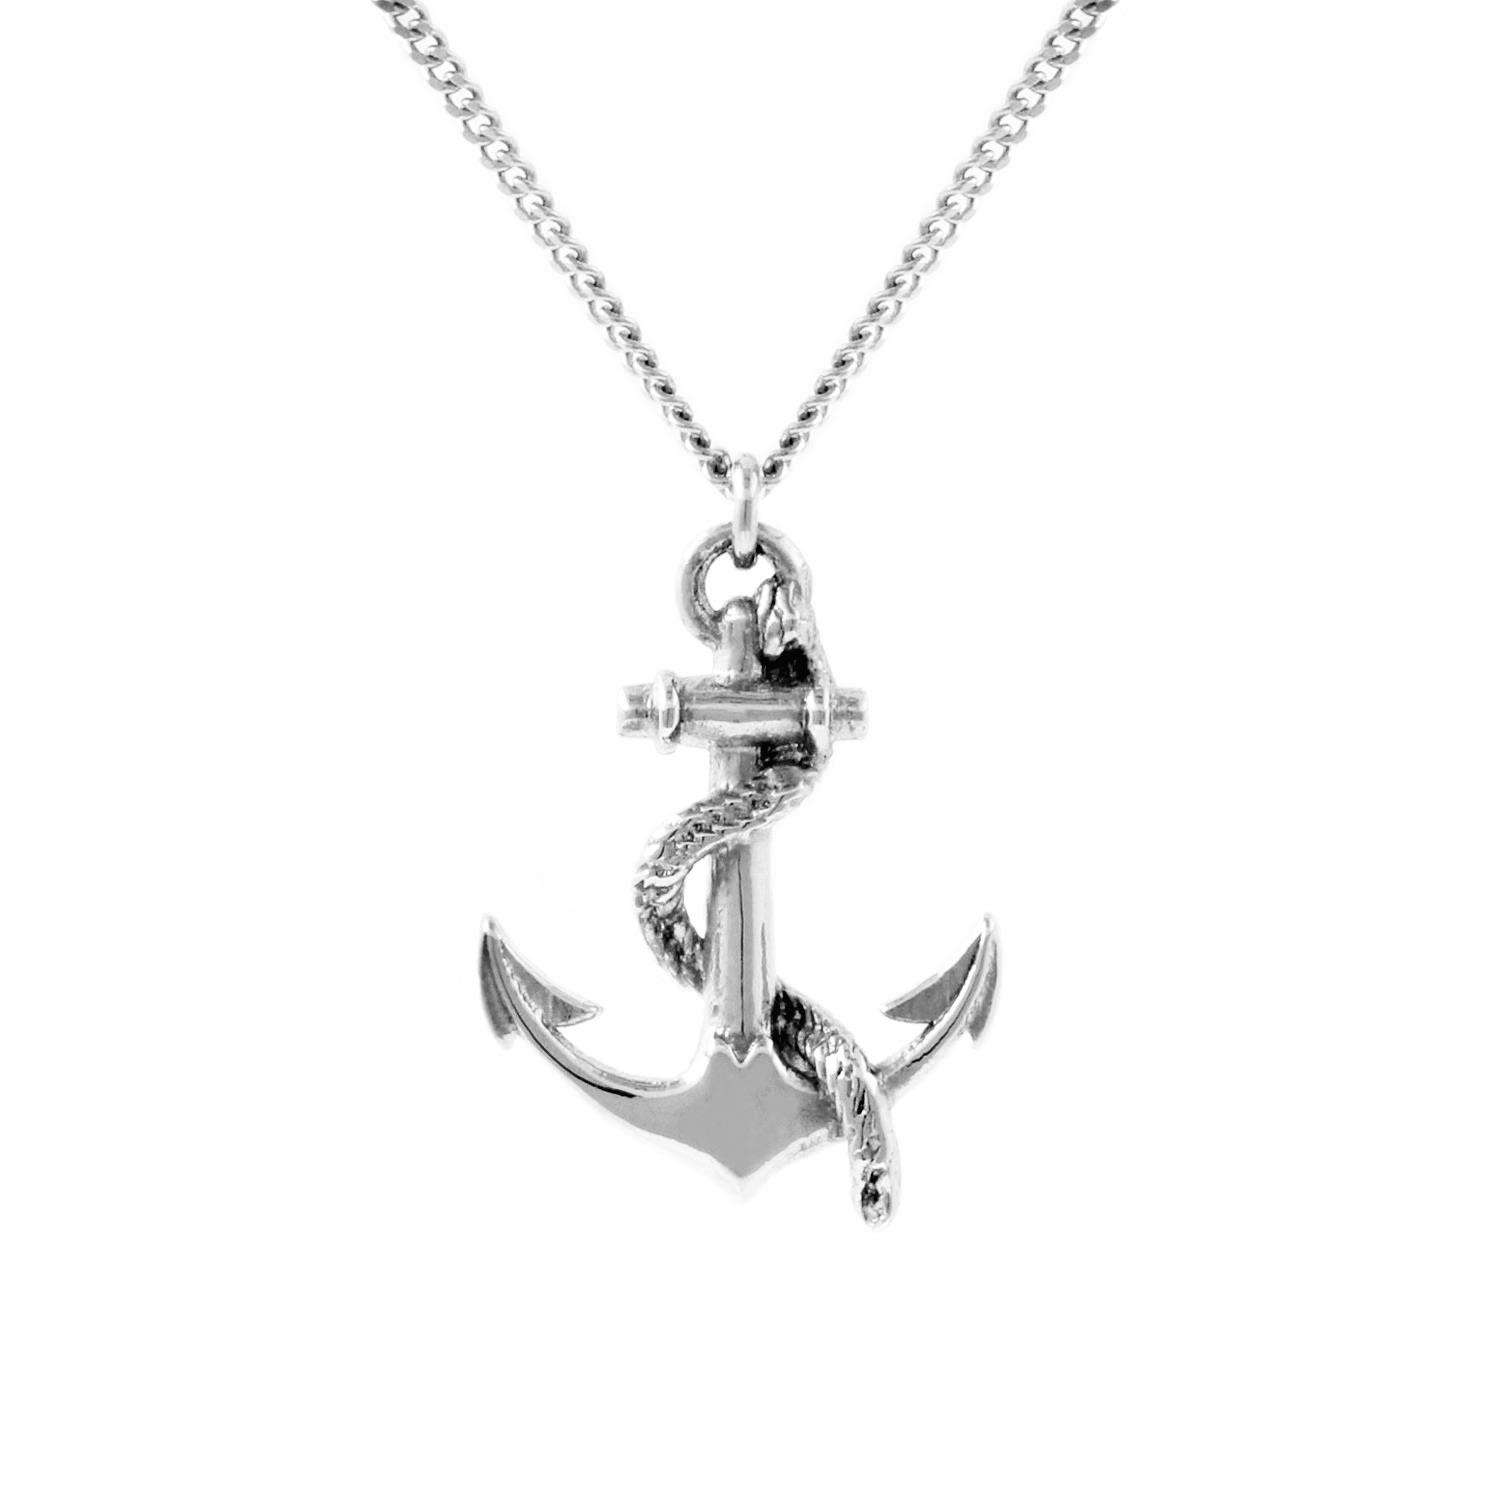 Lee Renee Women's Anchor Necklace - Silver In Gray